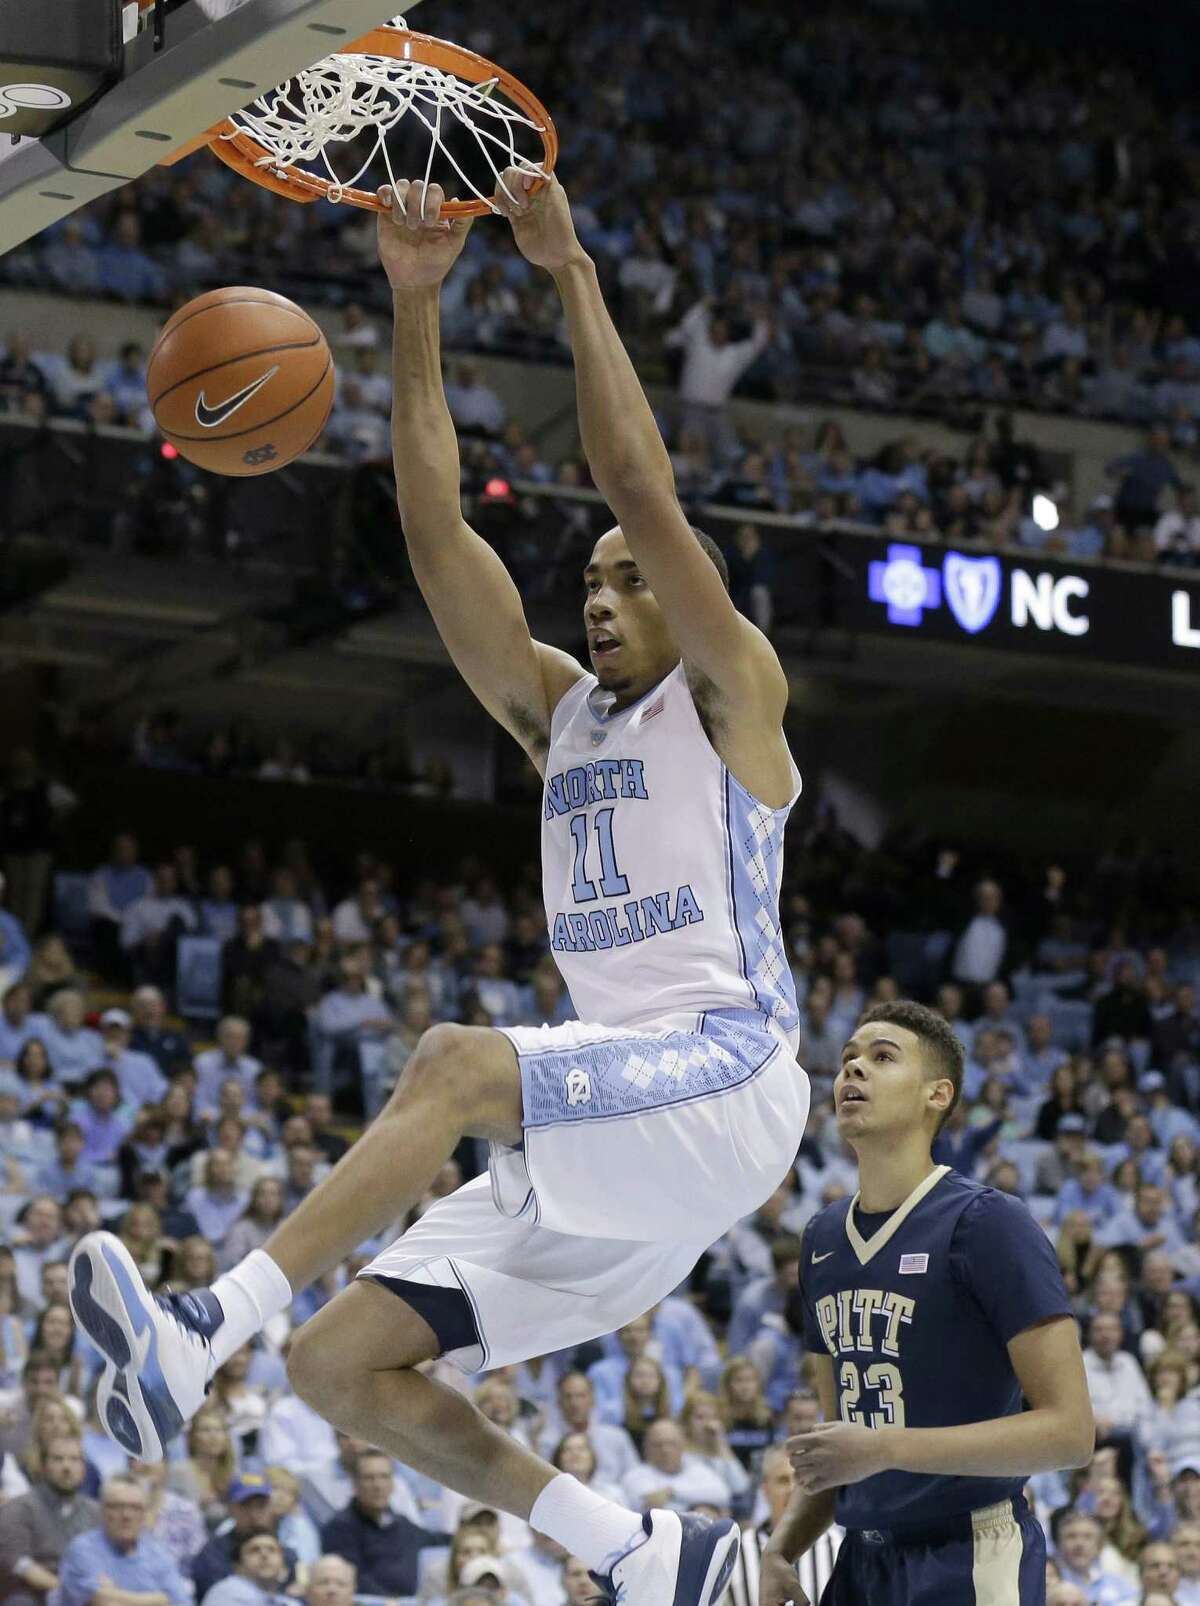 FILE - In this Feb. 14, 2016, file photo, North Carolina's Brice Johnson (11) dunks as Pittsburgh's Cameron Johnson (23) watches during an NCAA college basketball game in Chapel Hill, N.C. Johnson leads the ACC with 18 double-doubles. (AP Photo/Gerry Broome, File)